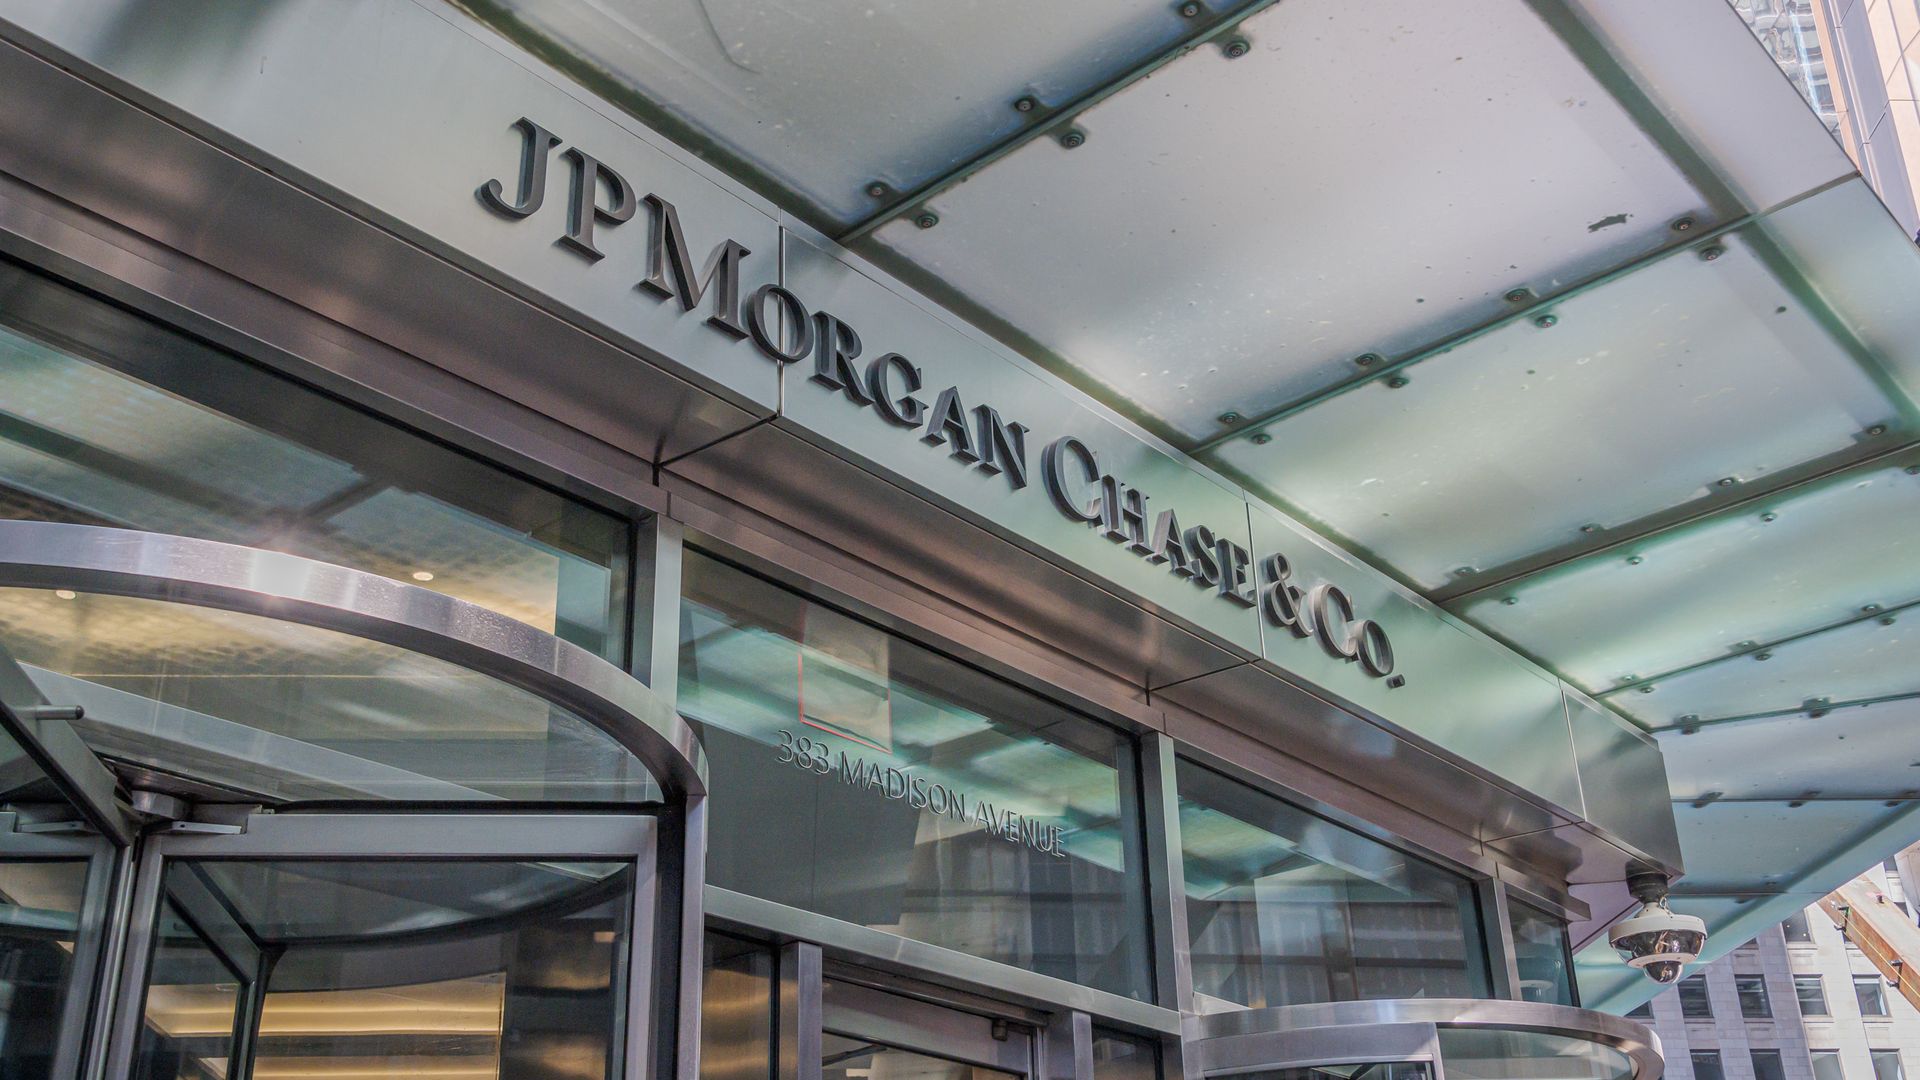 Marquee at the main entrance to the JPMorgan Chase Headquarters Building in Manhattan.